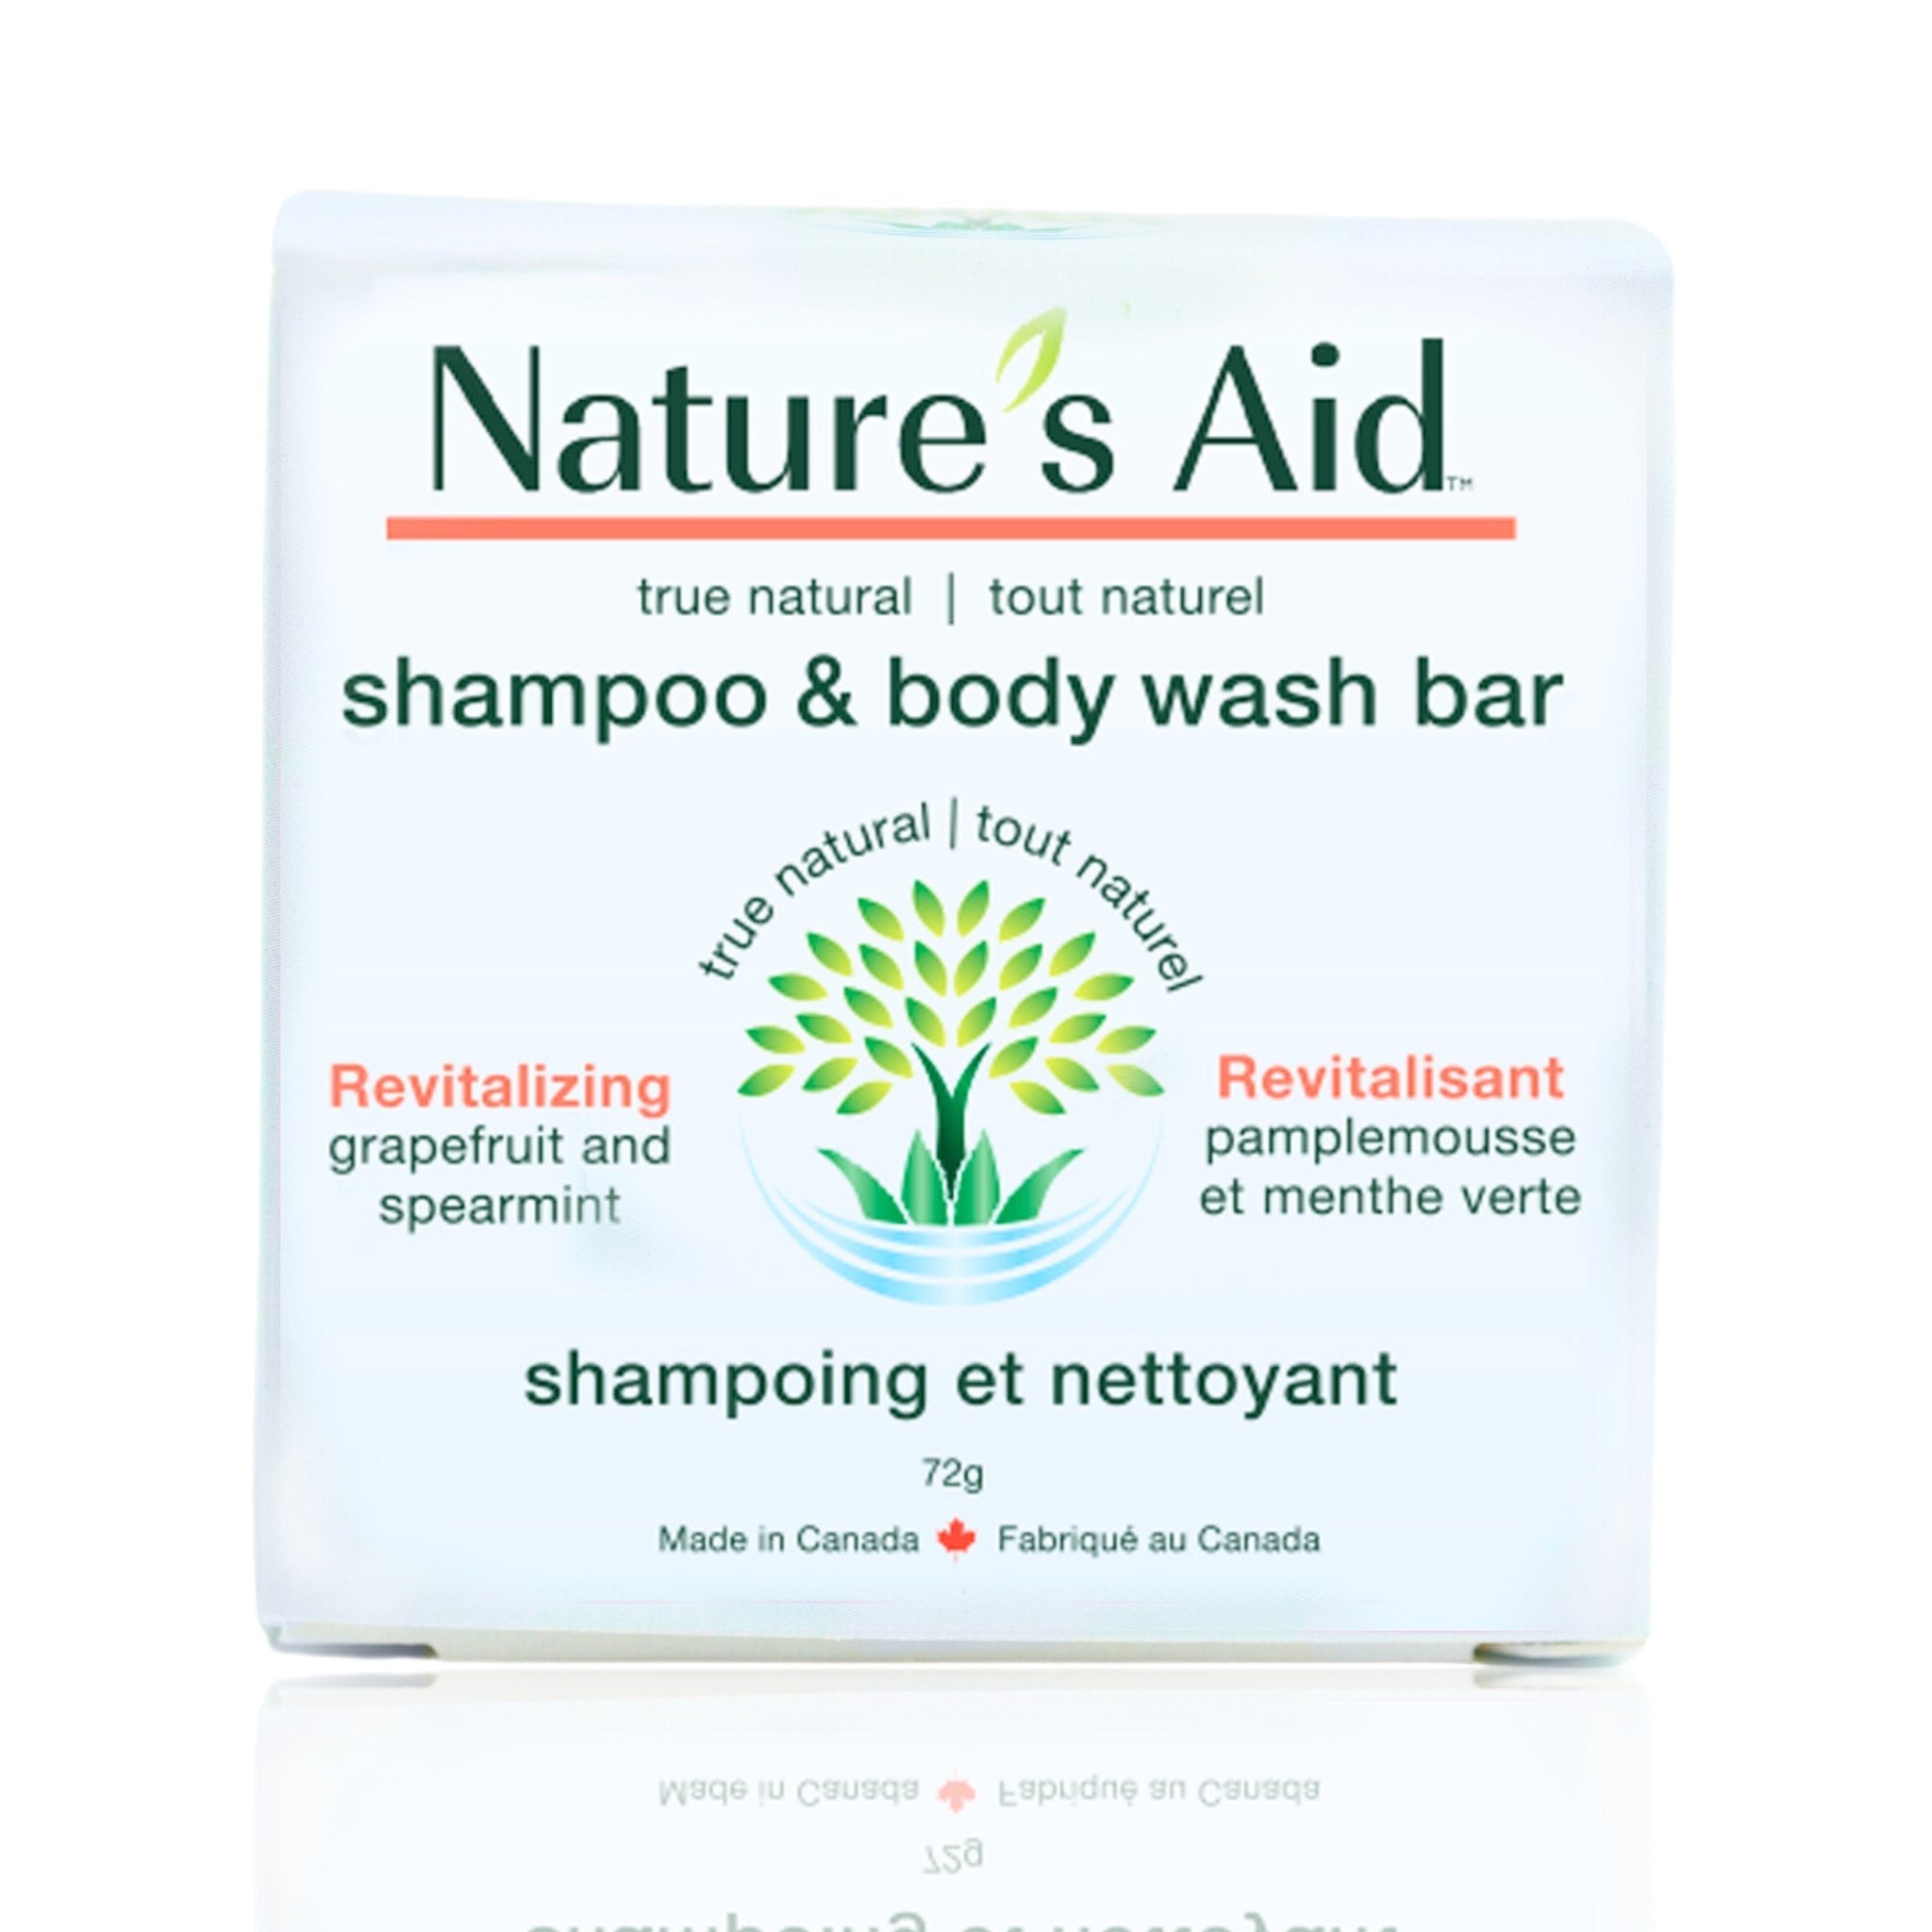 2in1 Shampoo and Wash | 72g Solid Bars | Cases - Nature's Aid, B2B, CASE